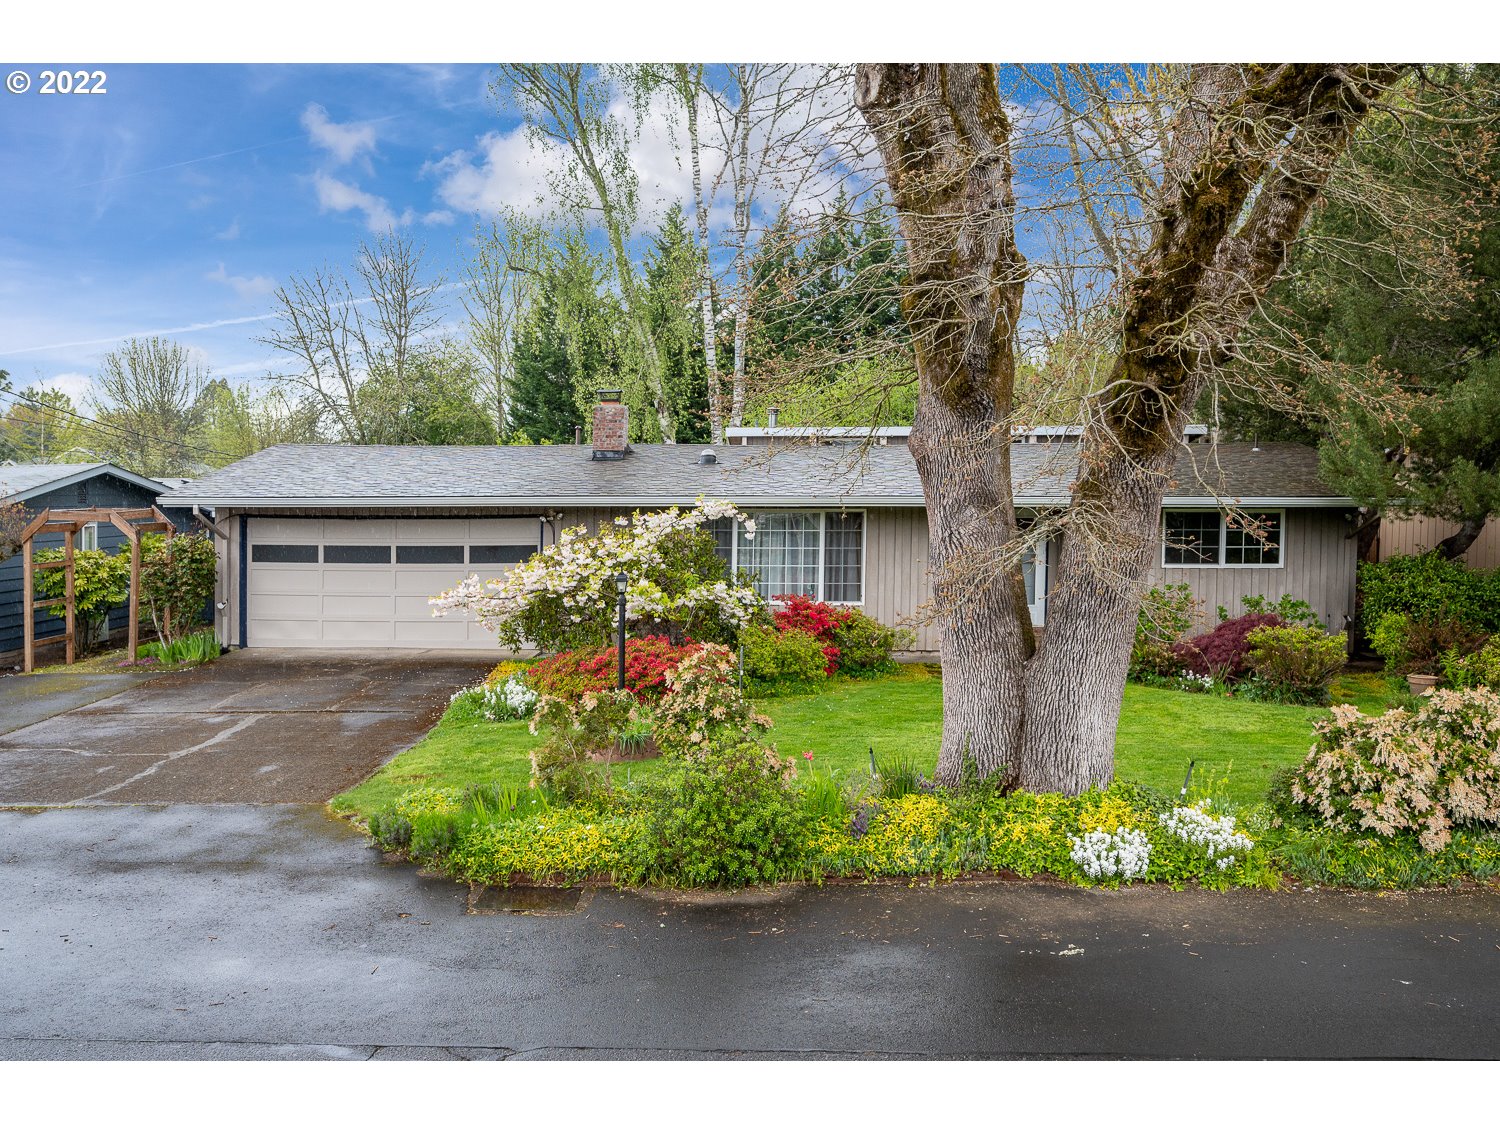 10175 SW KATHERINE ST, Tigard, OR 97223